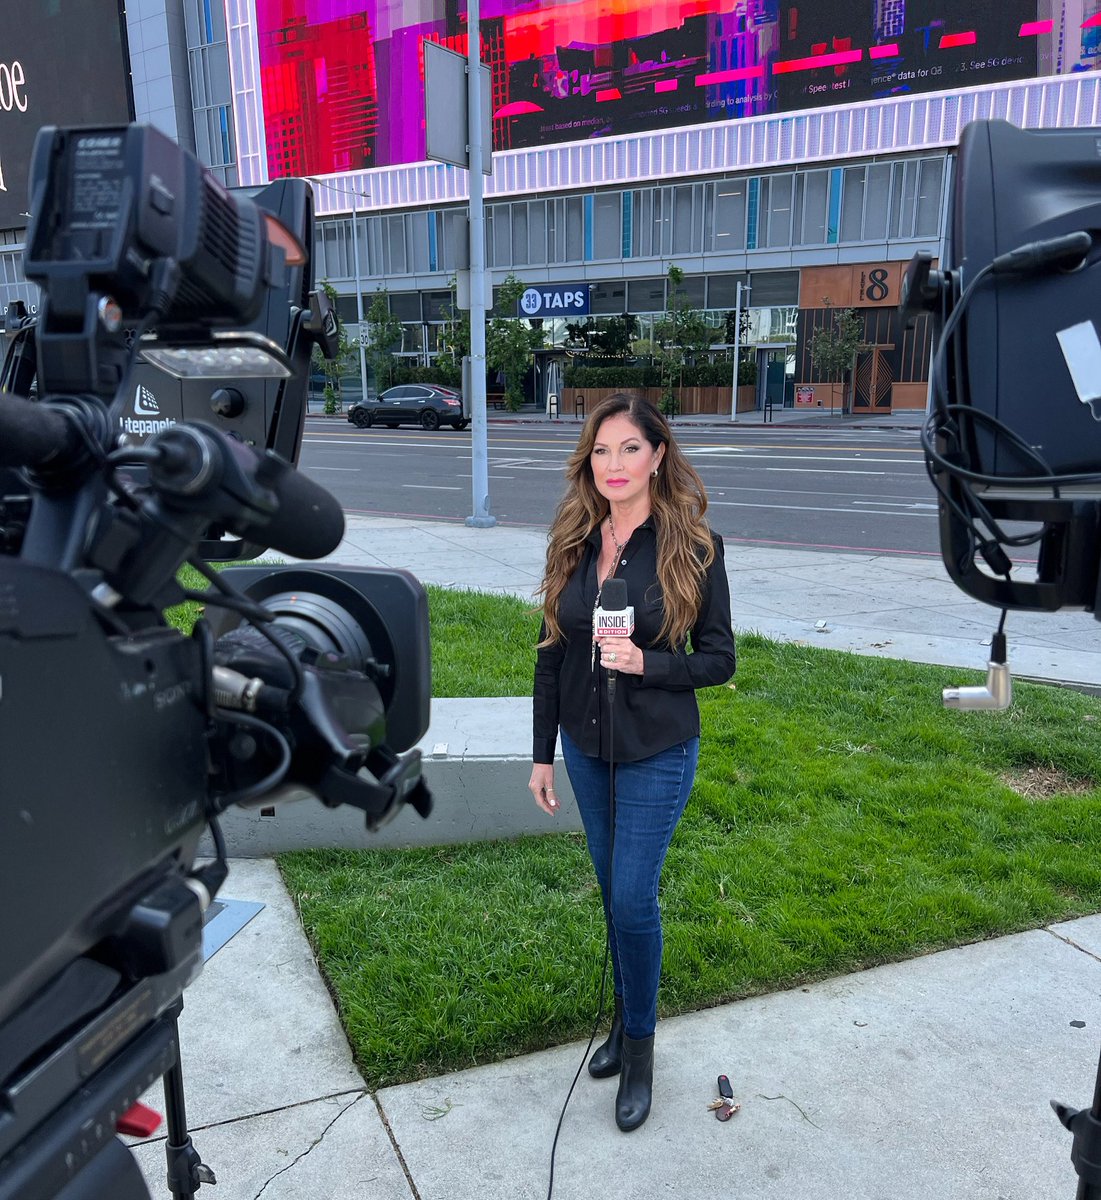 A) I’m not Mexican-American, I’m Chilean- American. Wrong continent, genius. And B) Here’s me actually covering violent crime today on national television. See, I can actually do my job pointing out things that need to improve AND cheer on the rule of law at the SAME TIME.